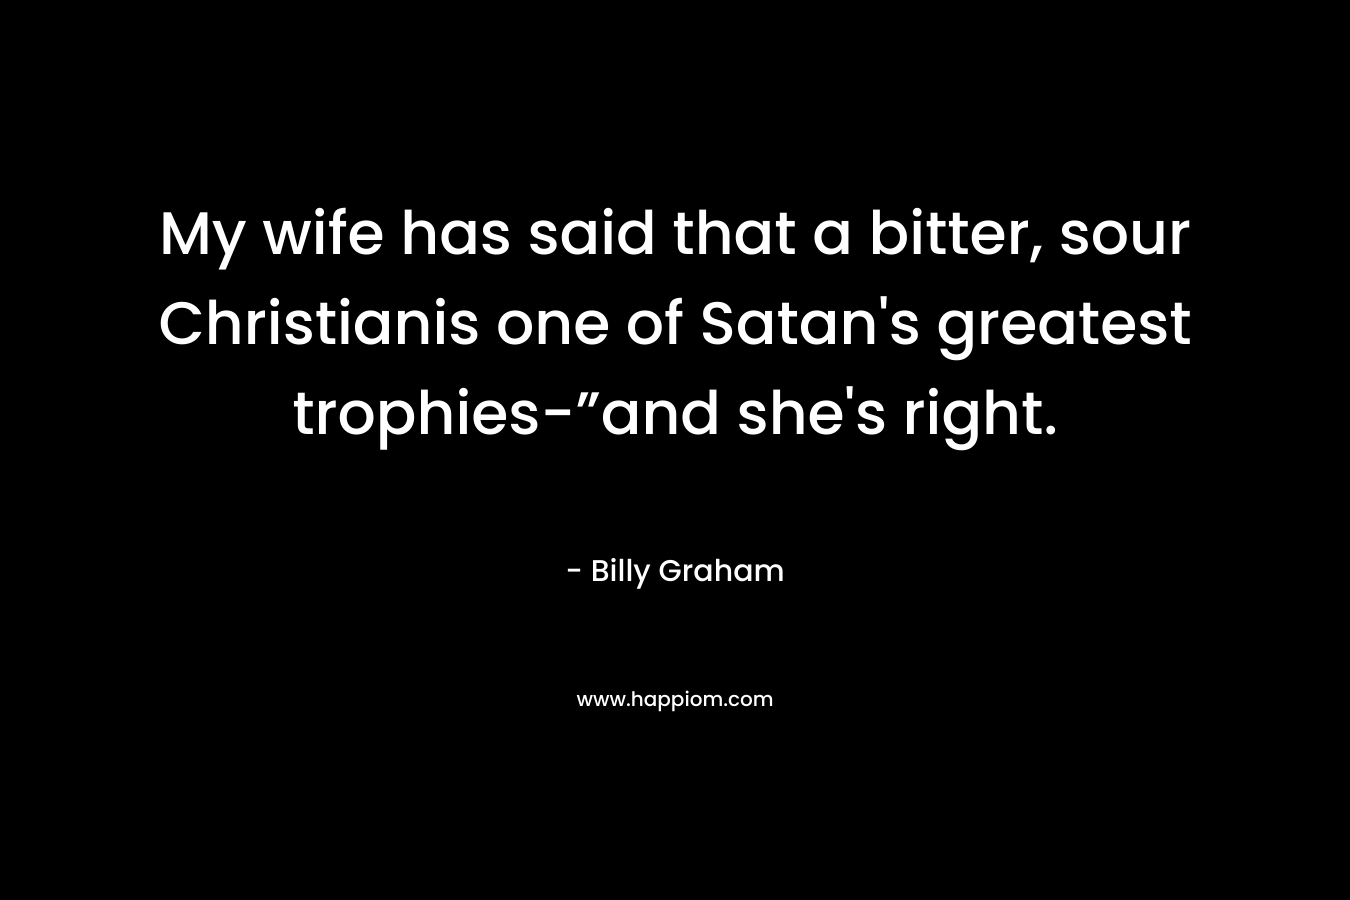 My wife has said that a bitter, sour Christianis one of Satan's greatest trophies-”and she's right.